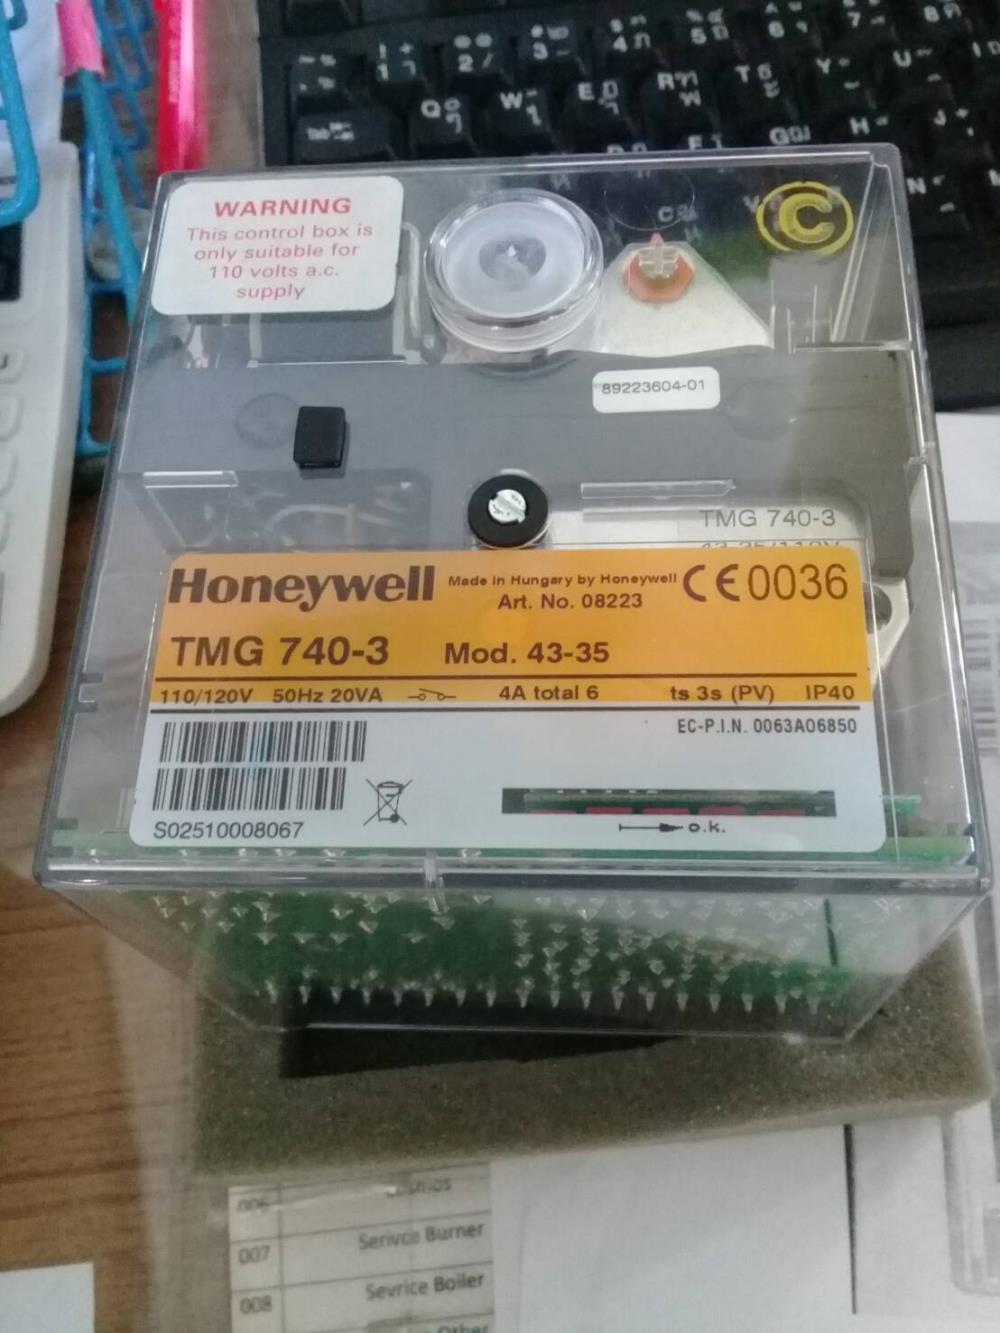 " Satronic" Control Box: TMG 740-3 Mod.43-35 110V  ( Honeywell ),"Satronic" Control Box: TMG 740-3 Mod.43-35 110V  ( Honeywell ),Satronic ,Honeywell,Instruments and Controls/Controllers